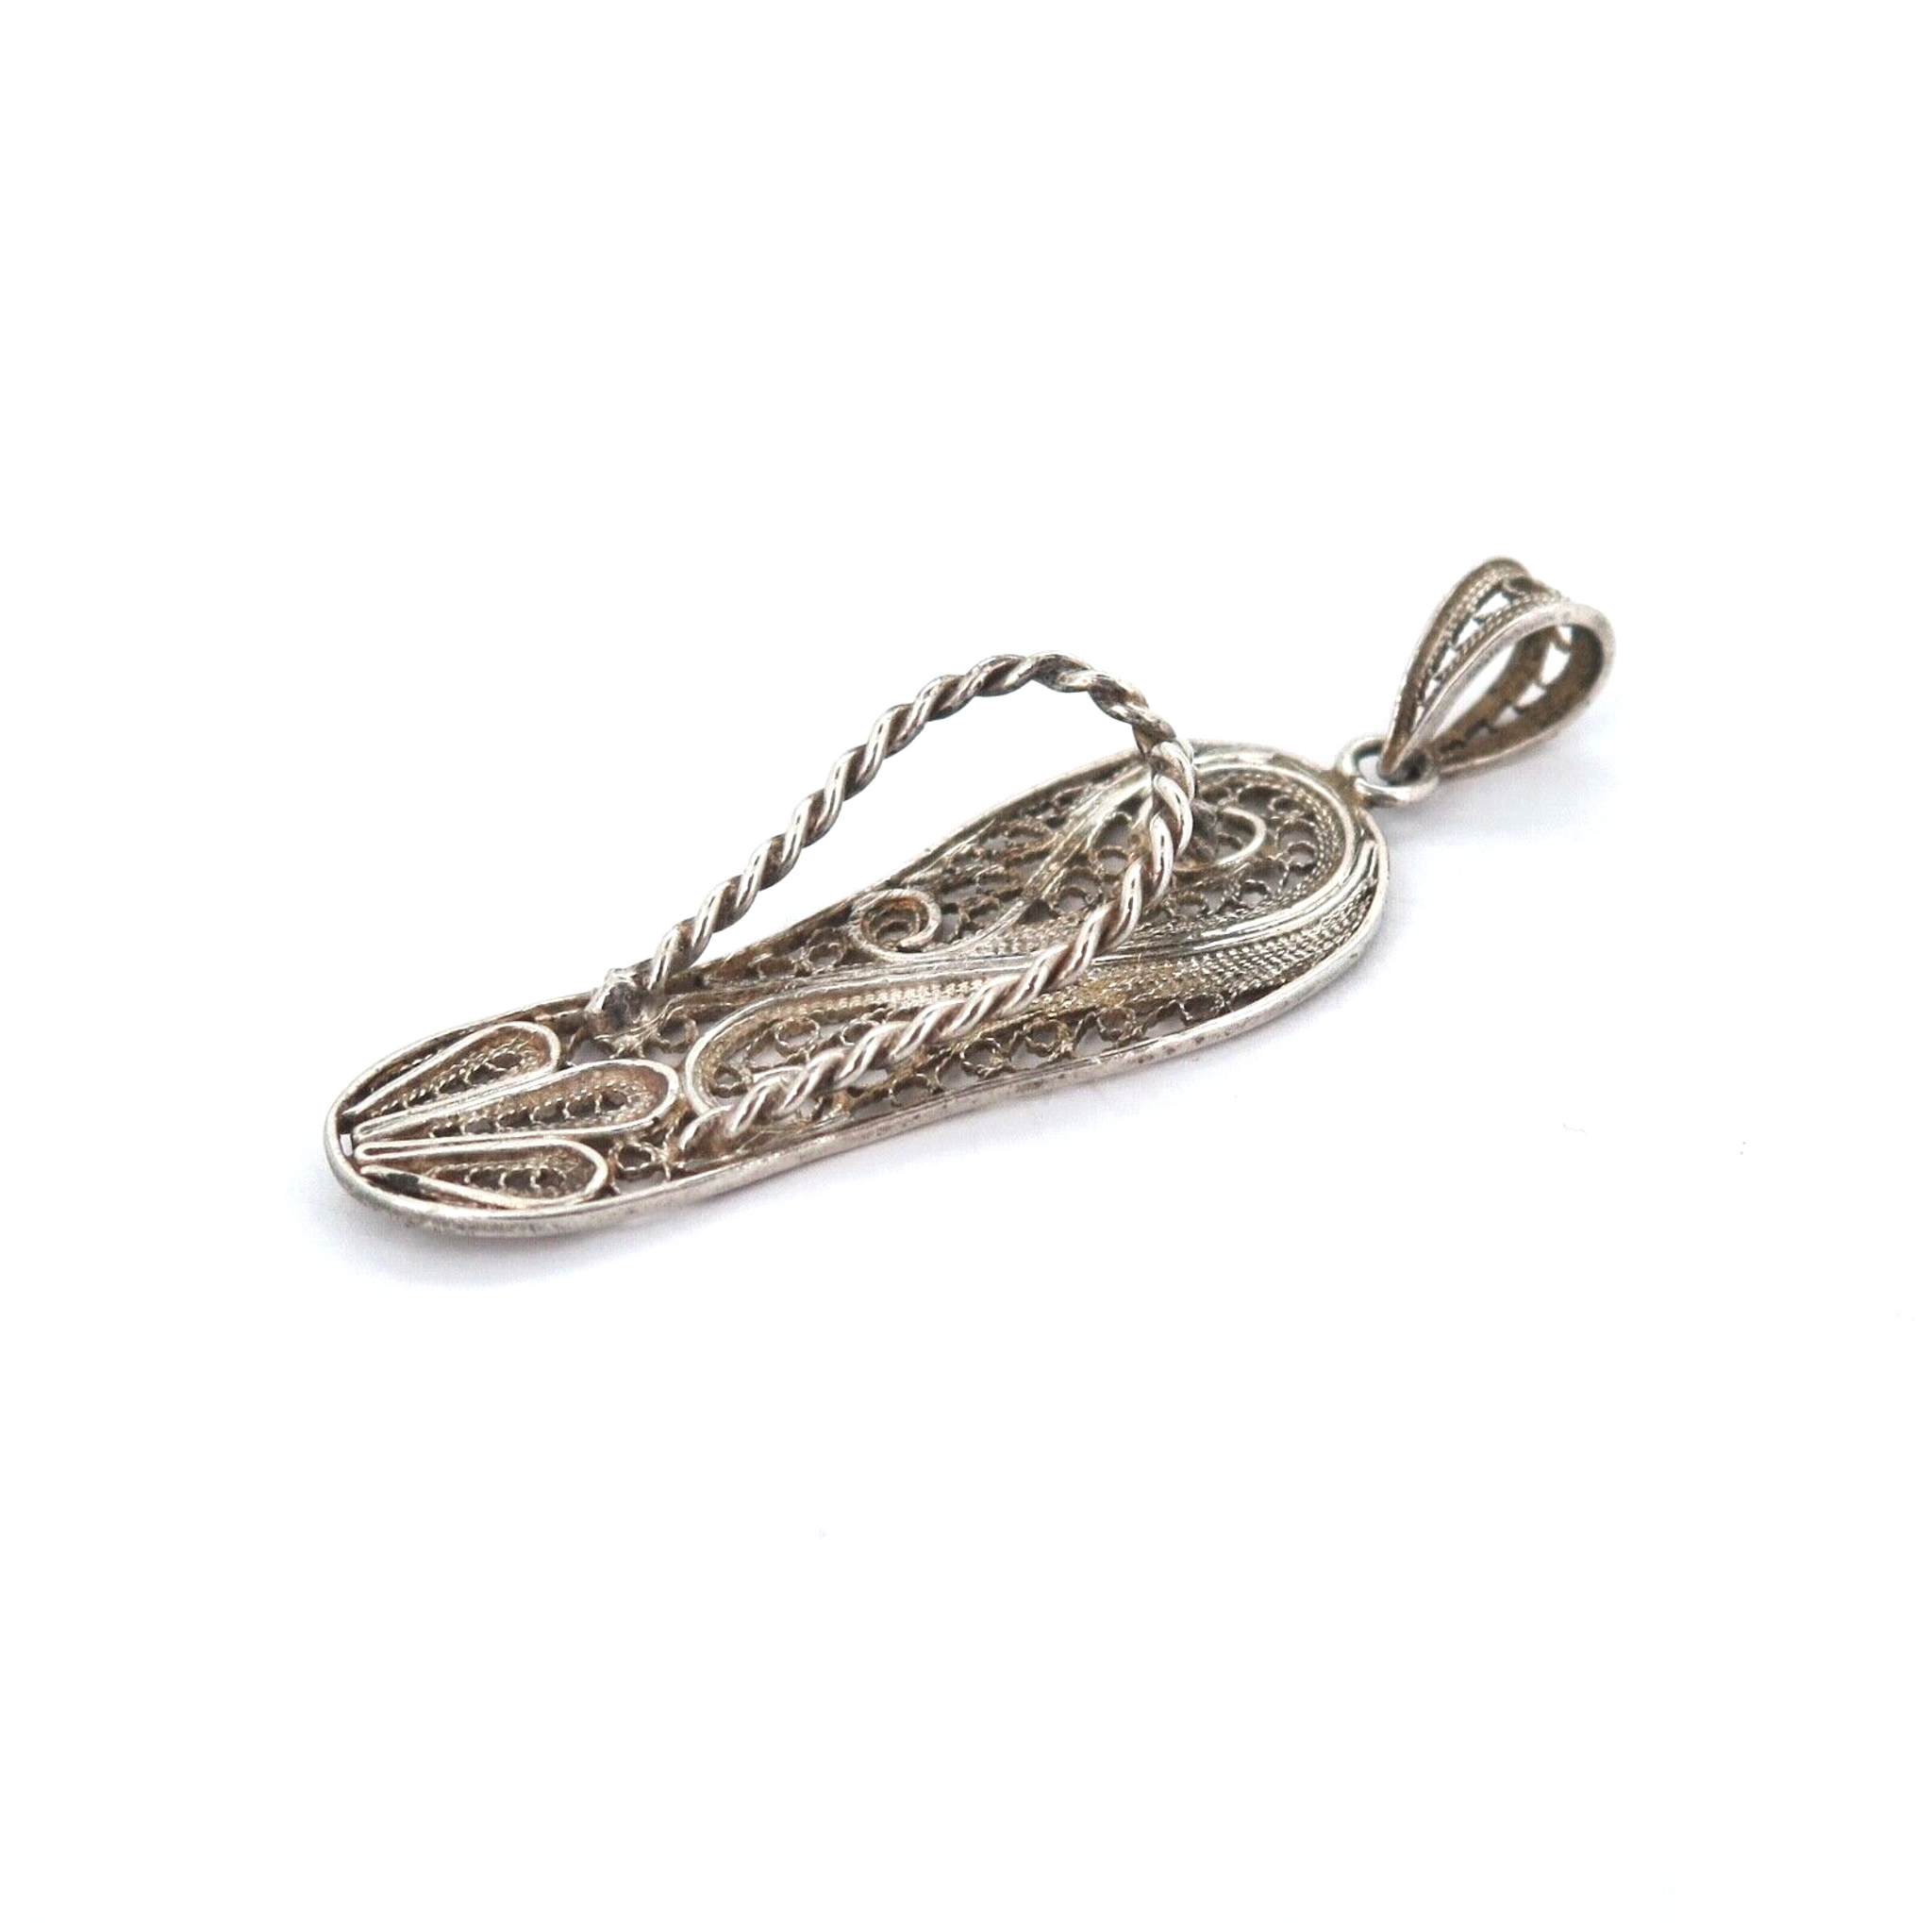 Vintage Articulated Sterling Silver & Turquoise Eyes Filigree Fish Pendant  Fob - Harrington & Co.